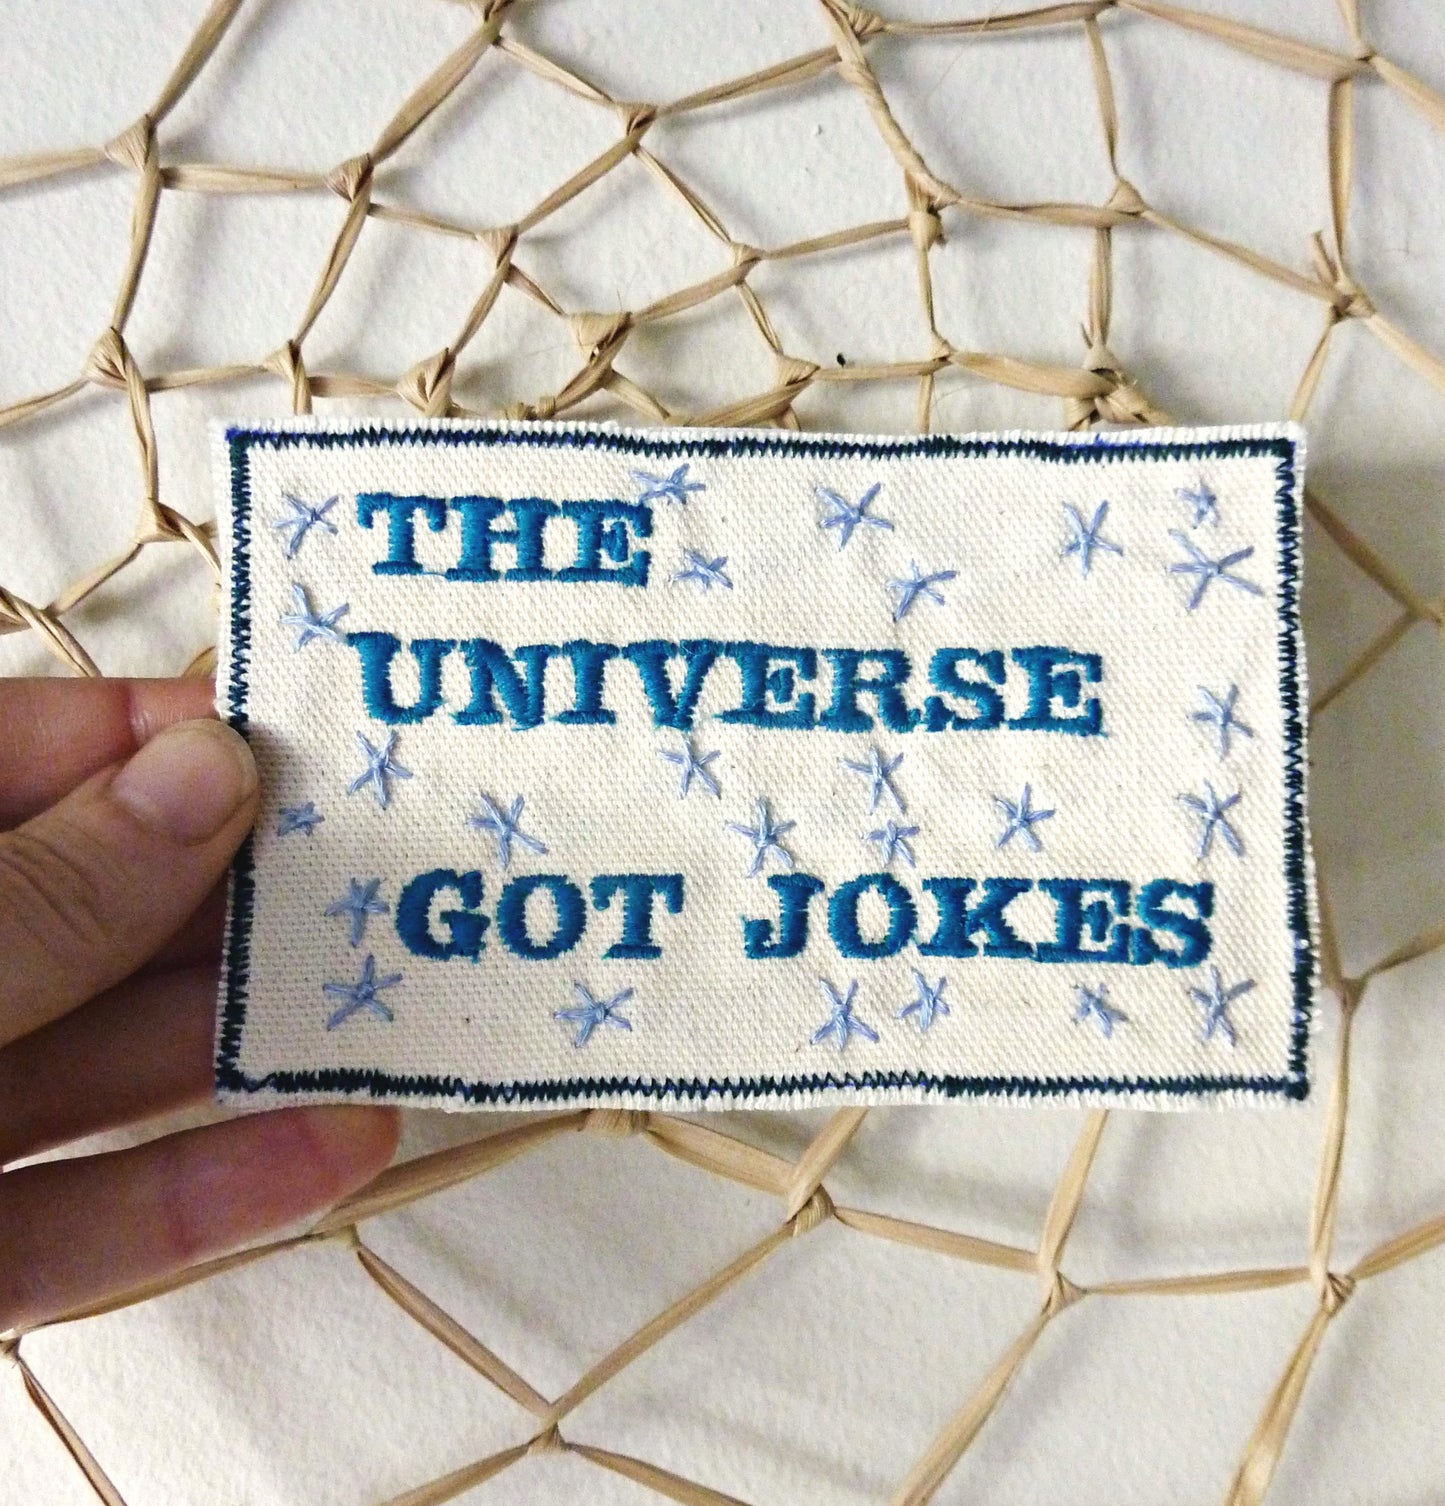 The Universe Got Jokes. Hard Reality on Embroidered Patch